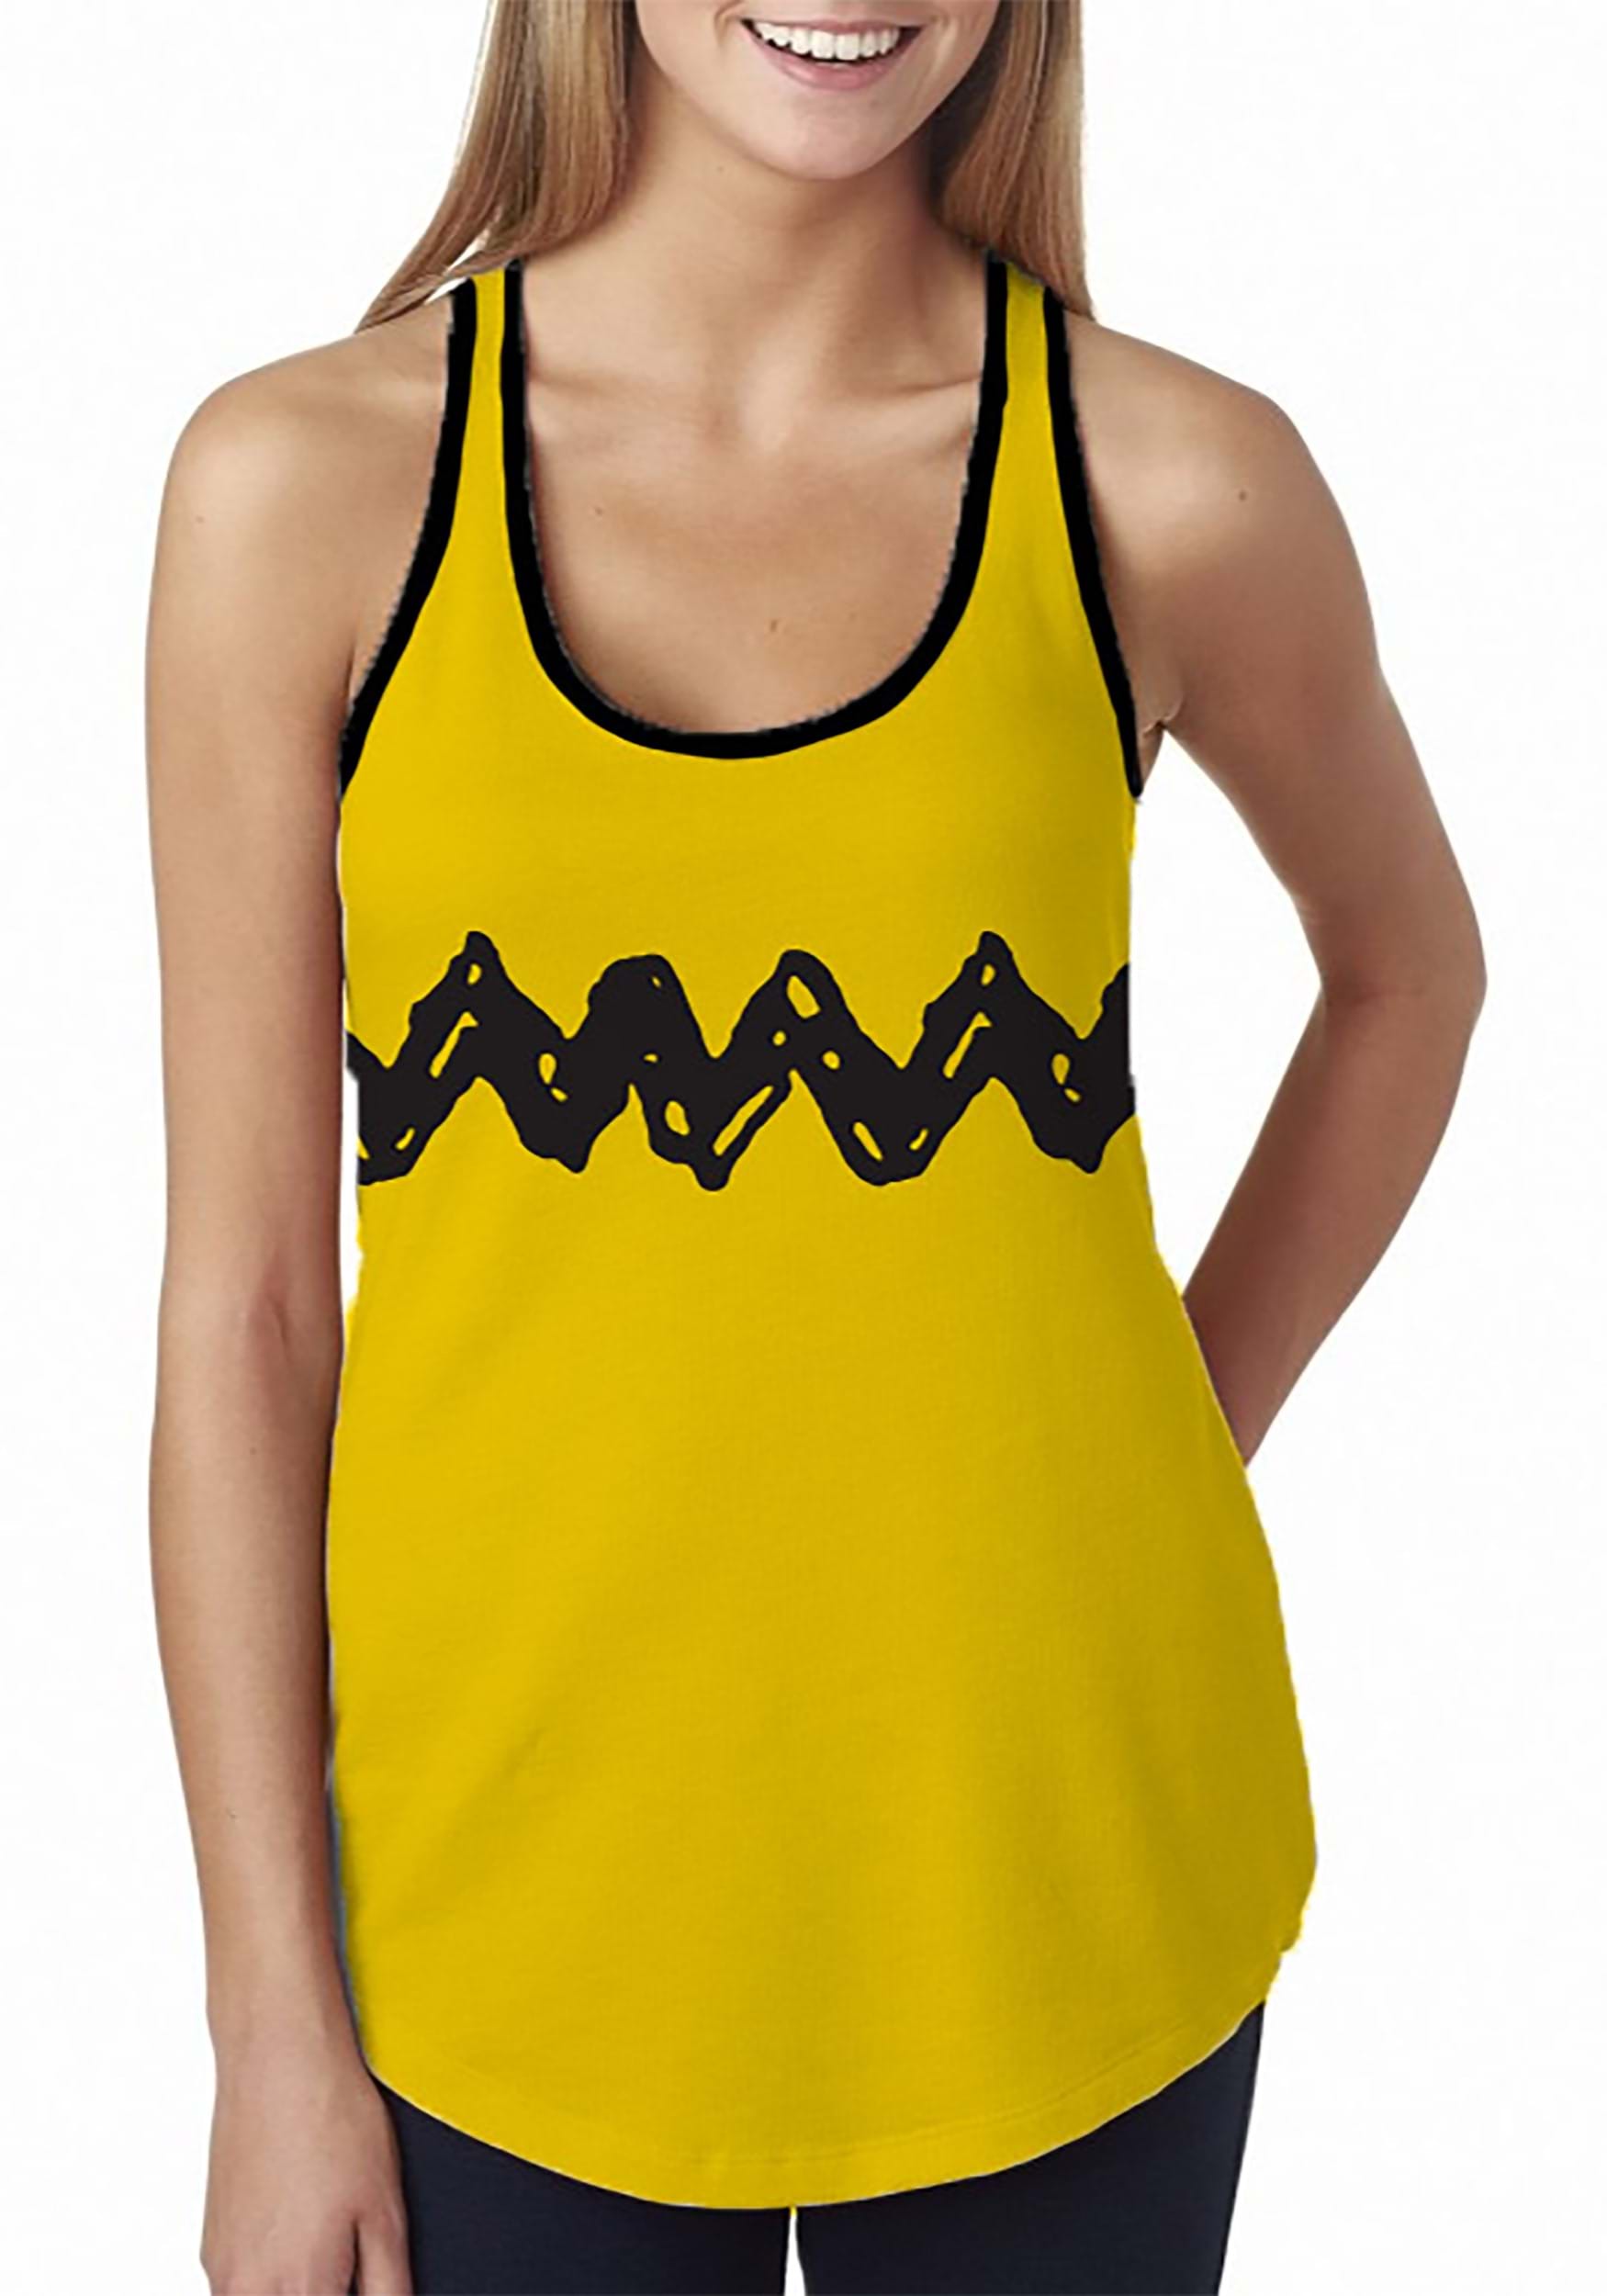 Charlie Brown Tank Top For Women , Charlie Brown Costume Apparel